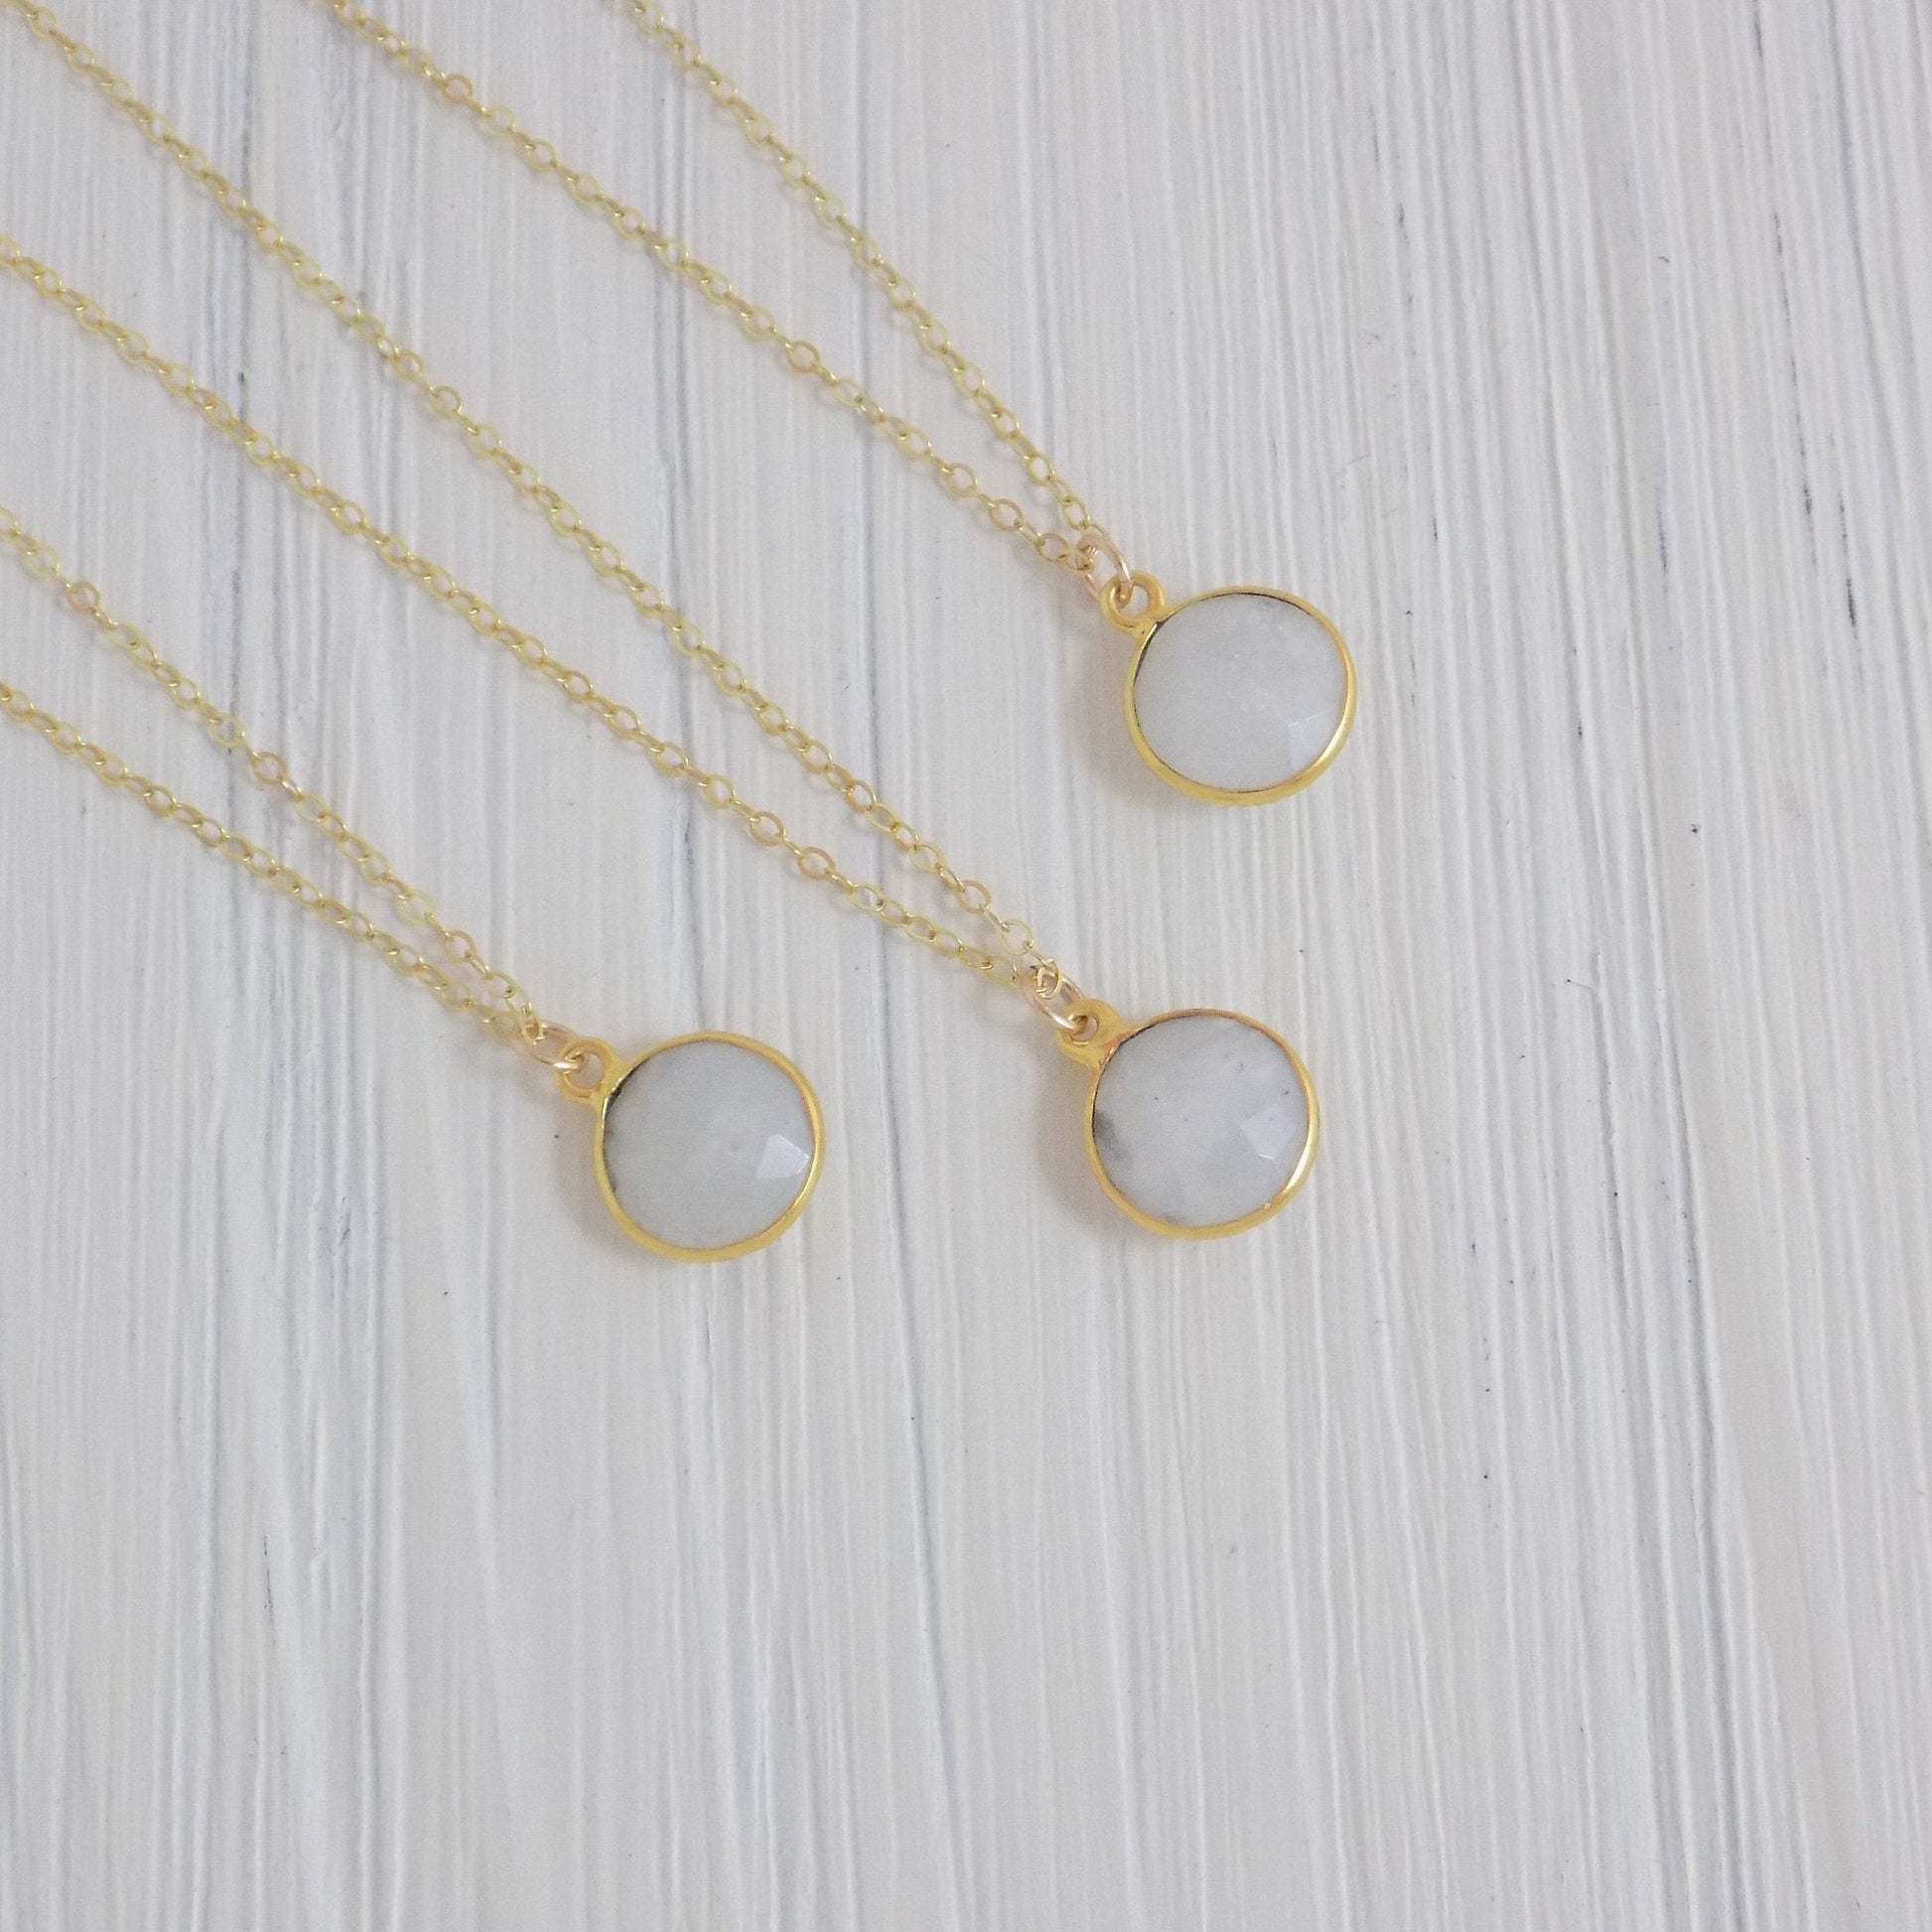 Round Moonstone Gemstone Necklace with Personalized Initial Gold, White Crystal, M3-12